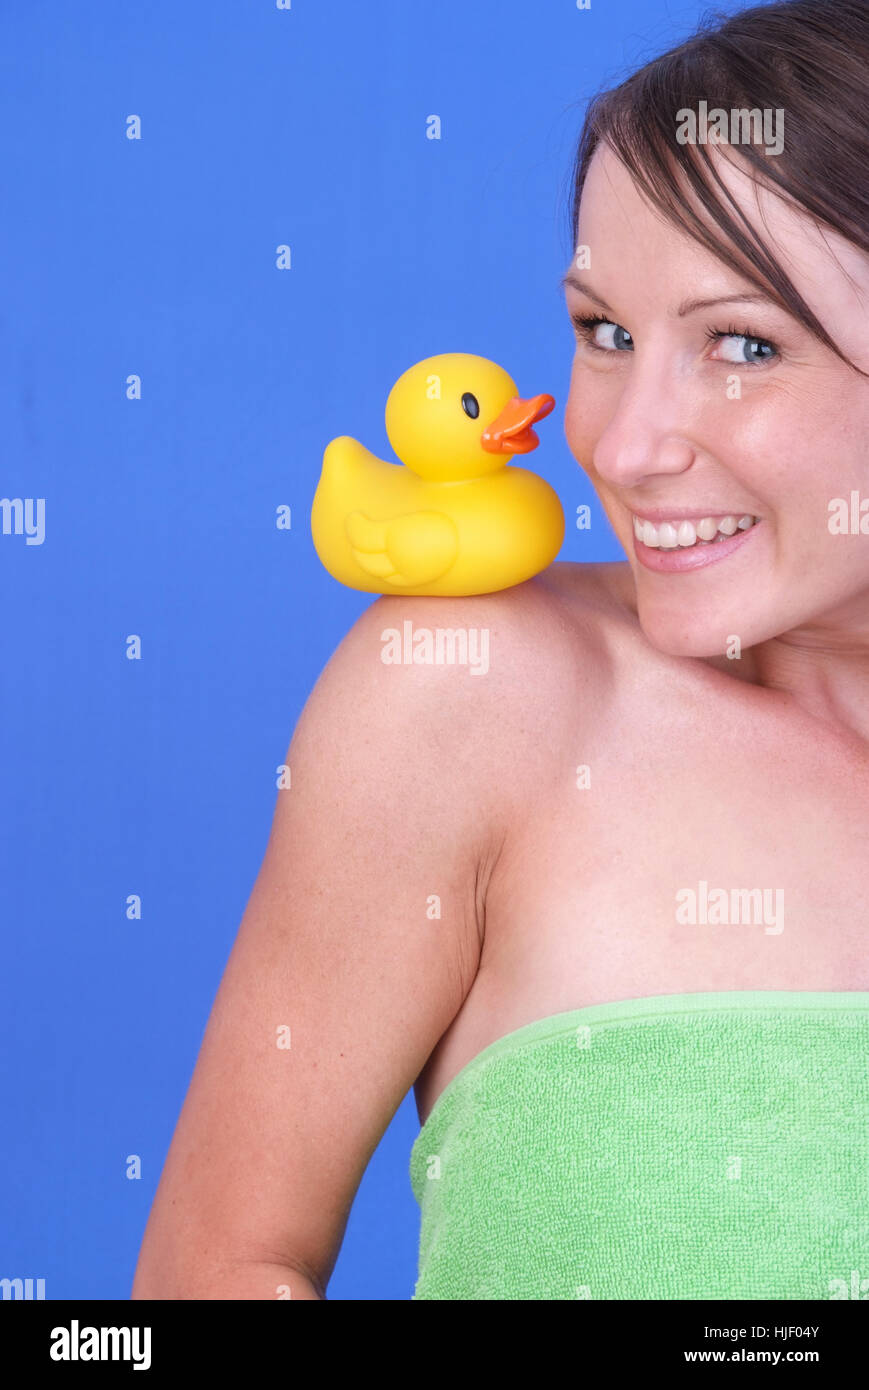 Woman with rubber duck on shoulder Stock Photo